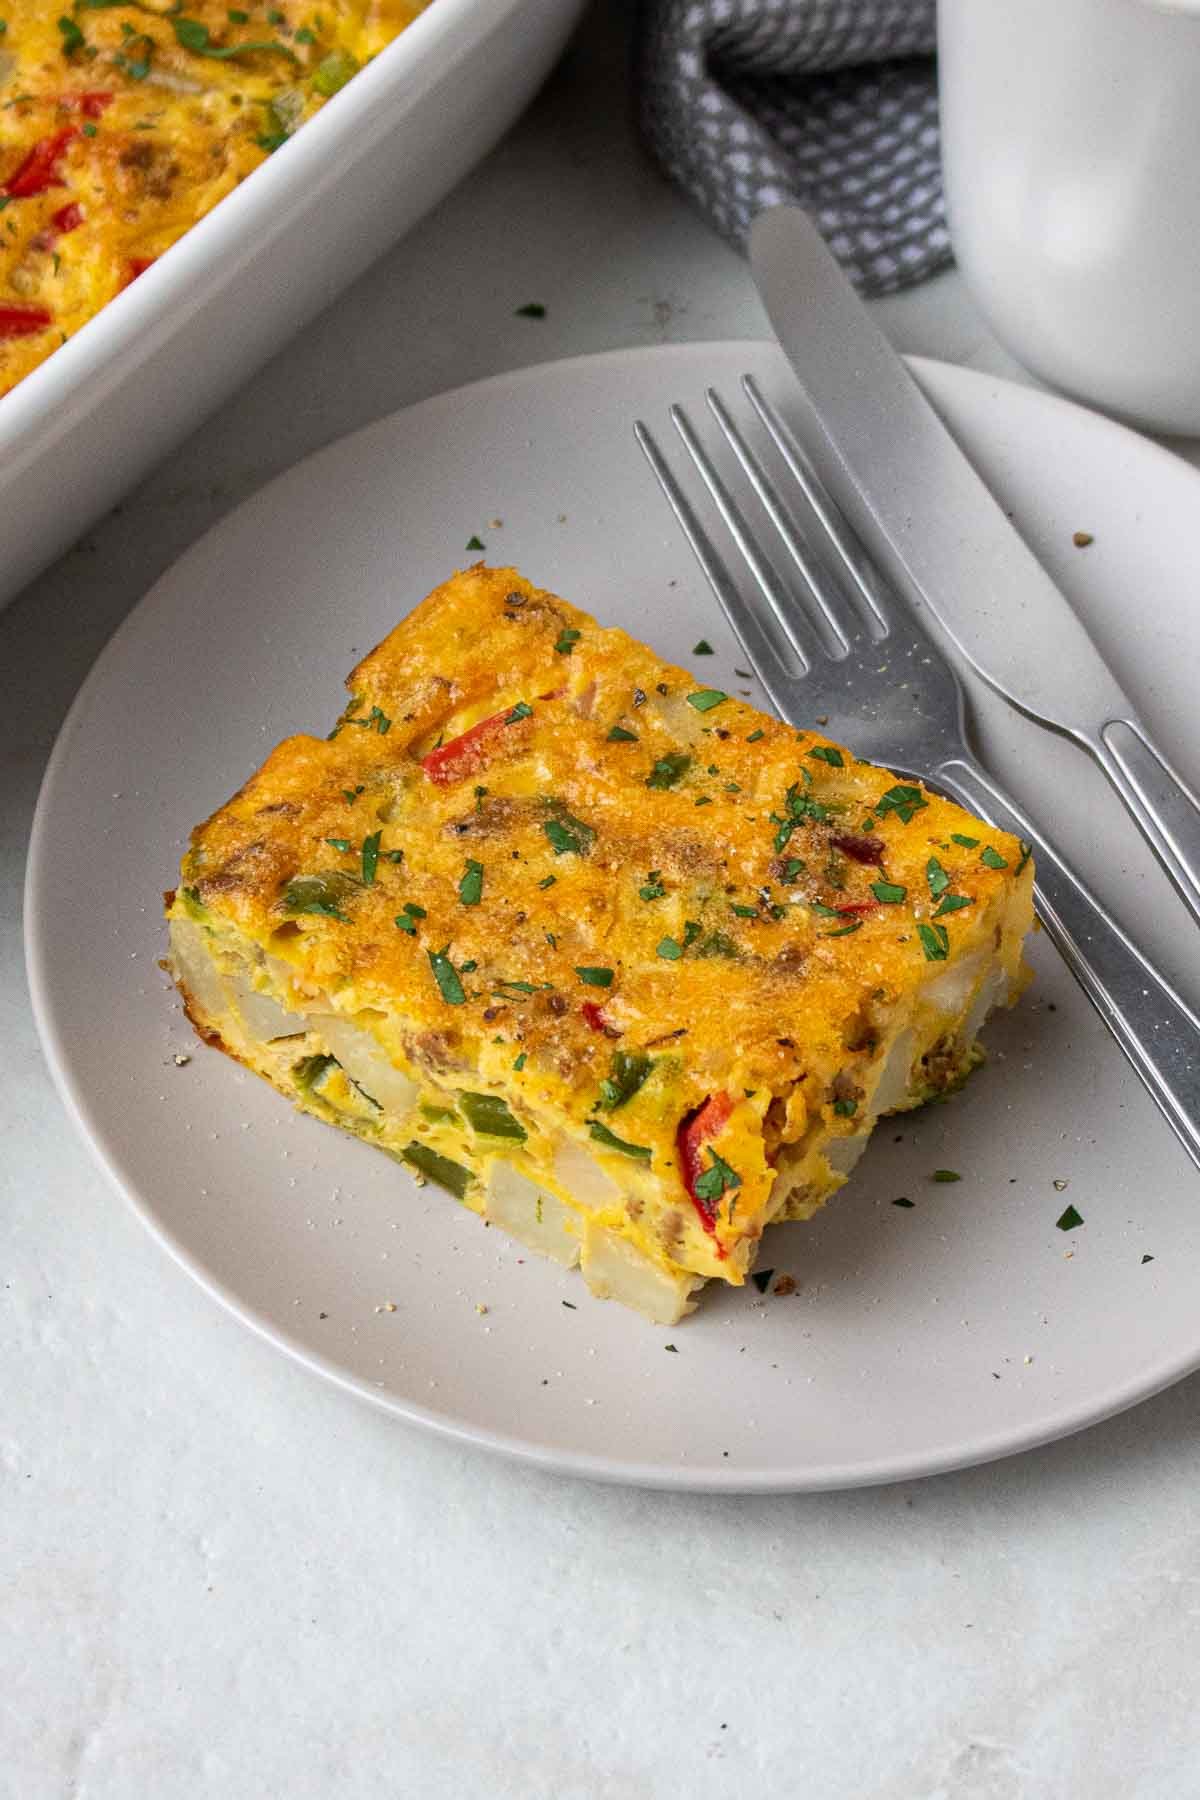 Slice of breakfast casserole with potatoes with sausage and bell peppers on a plate